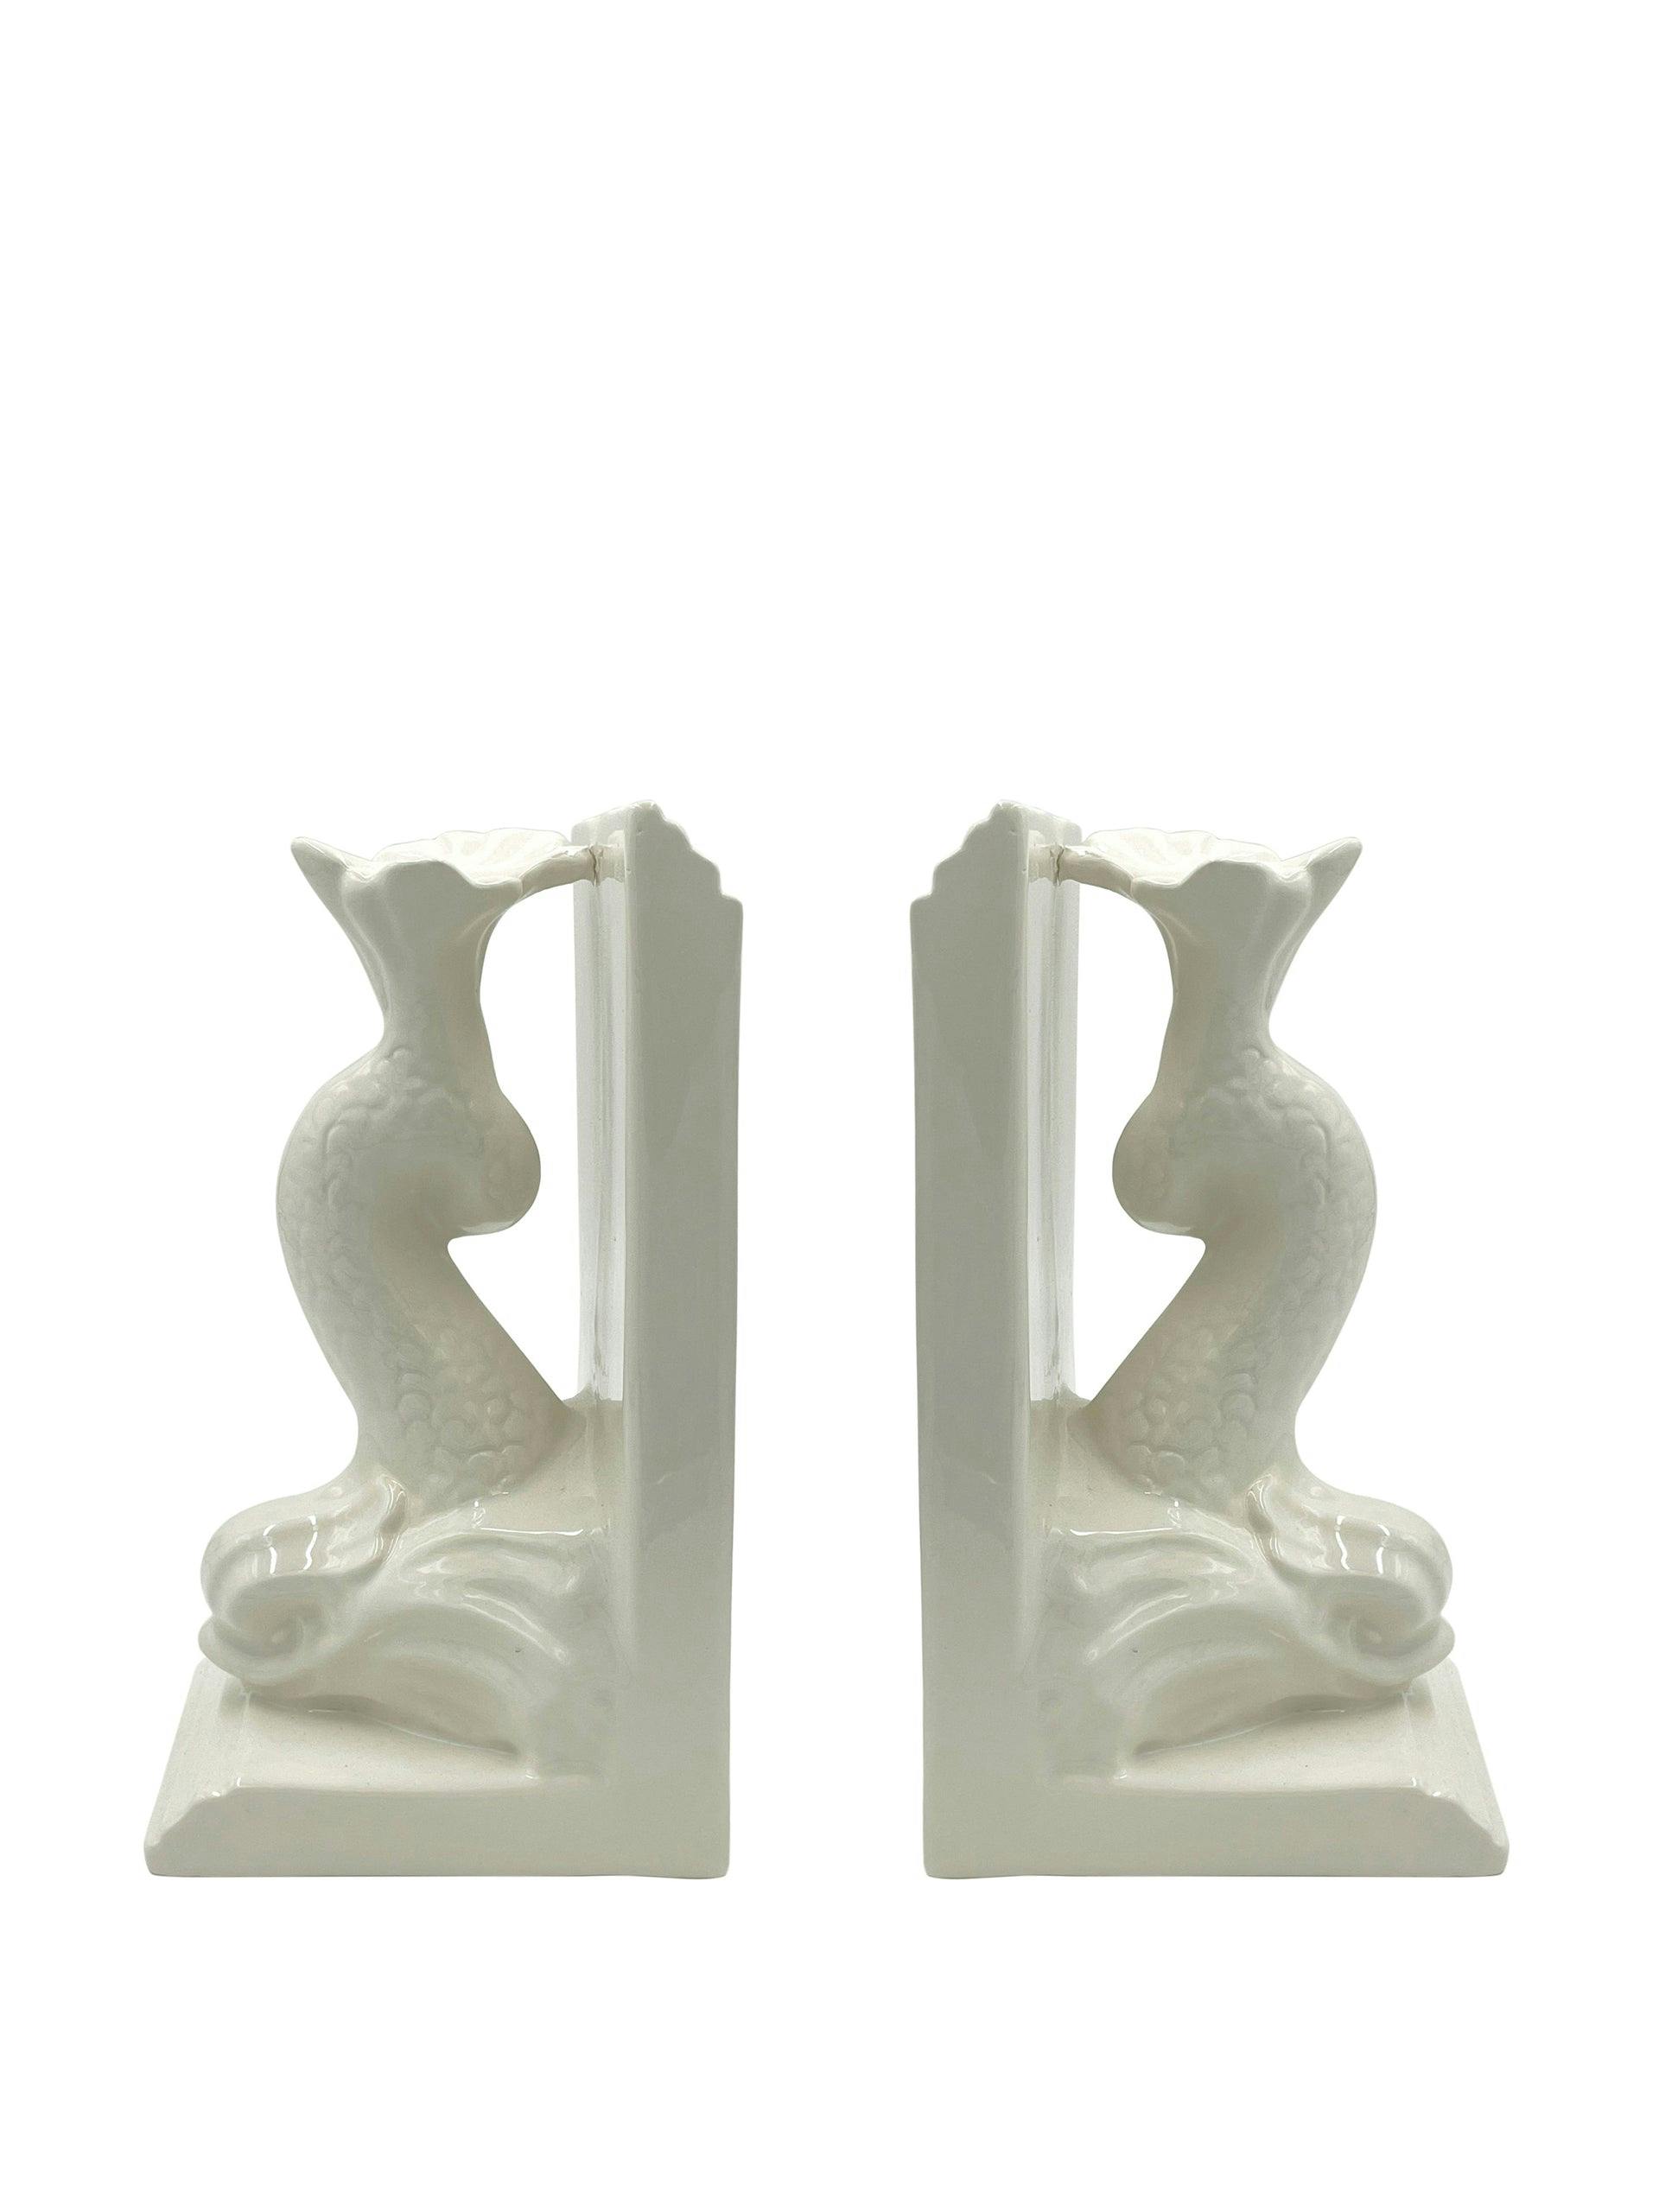 Pair of dolphin bookends in cream